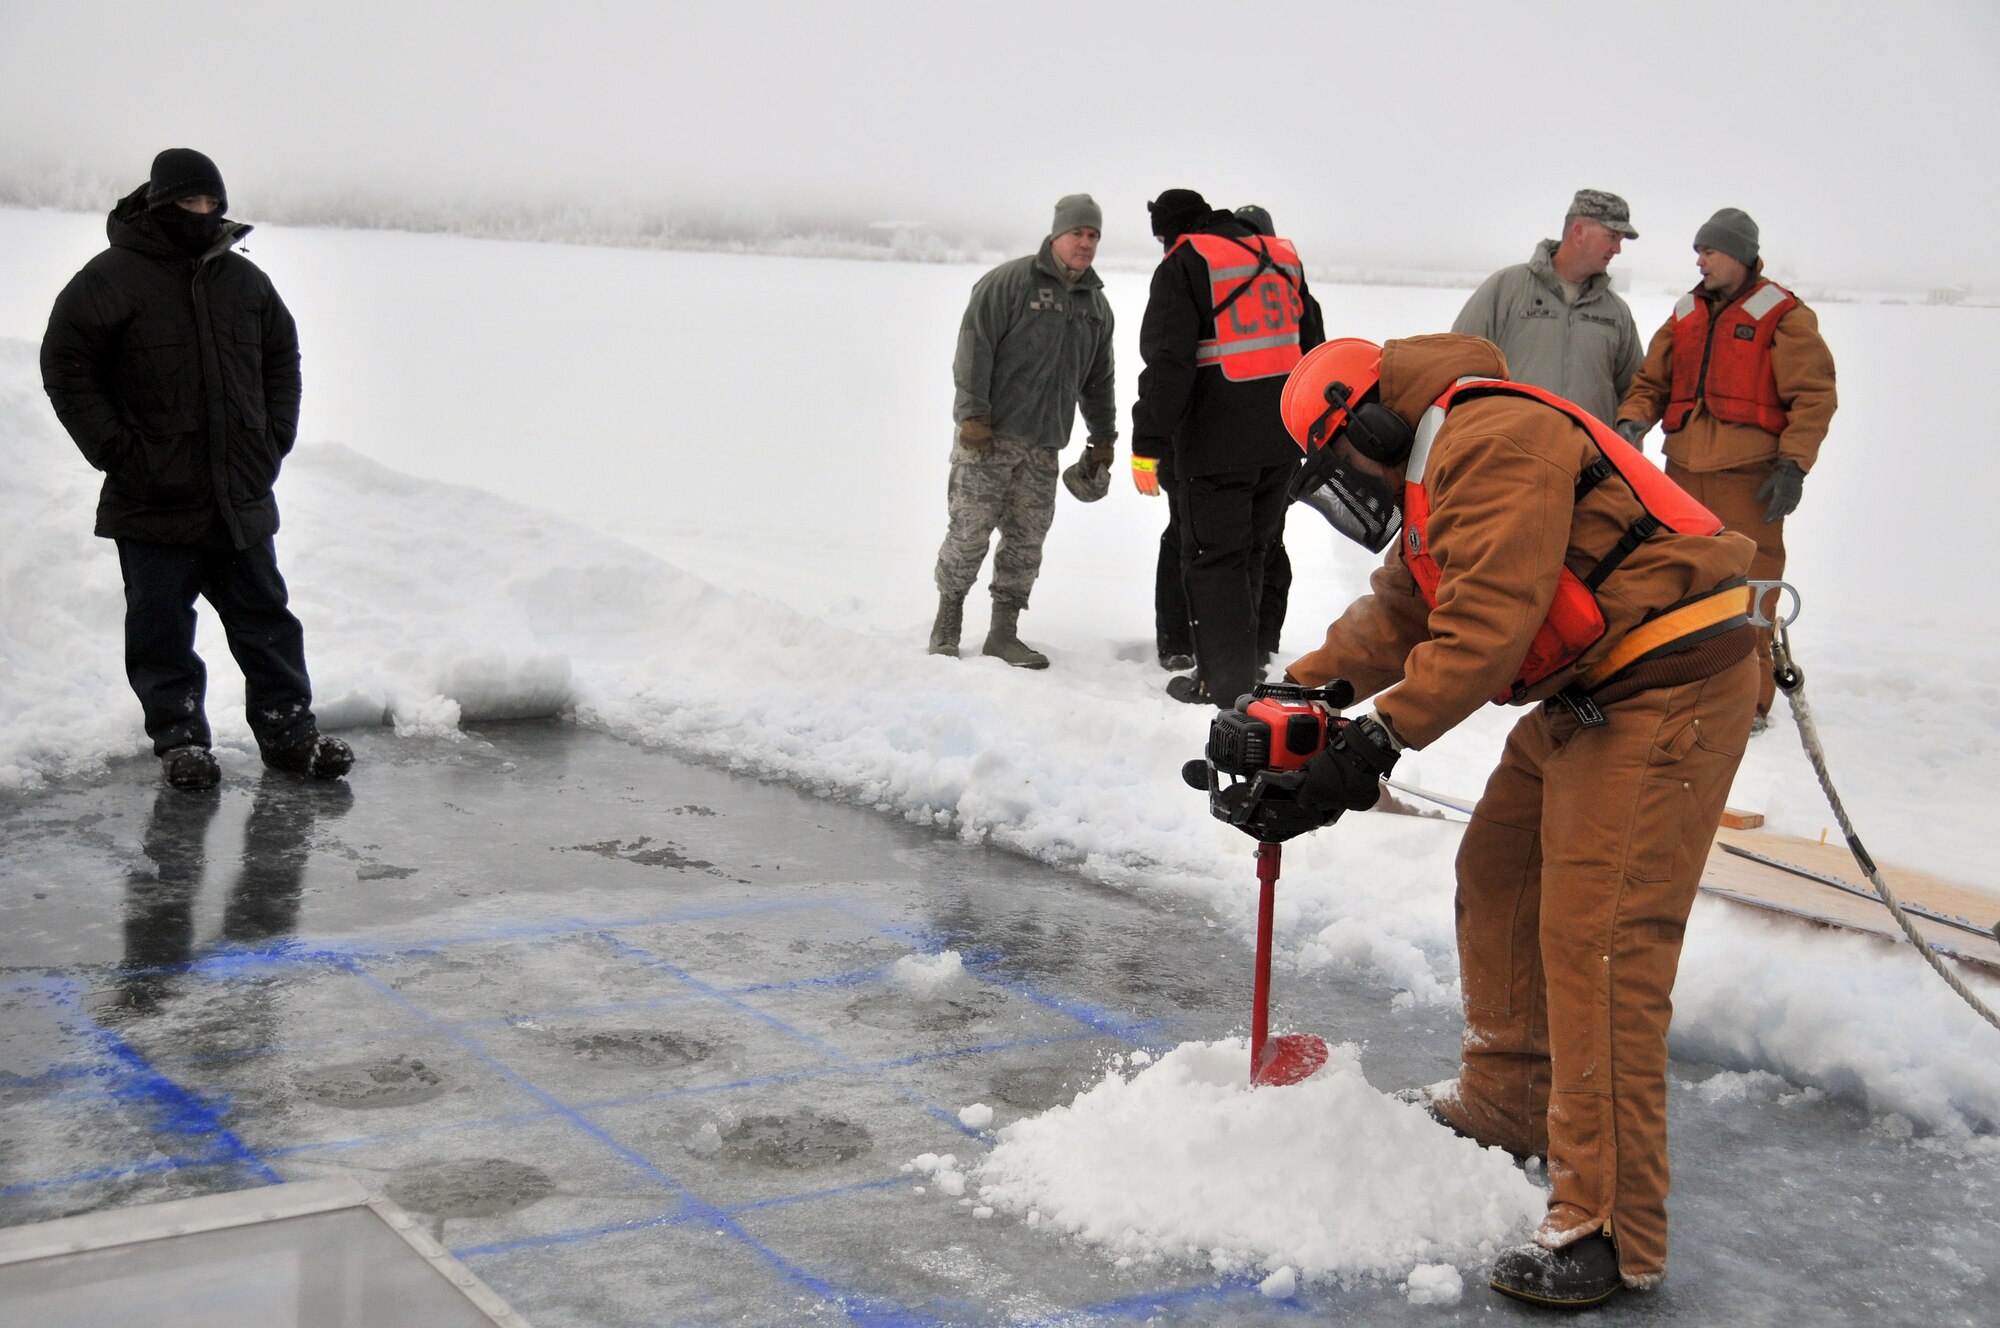 Tech. Sgt. Douglas Ward drills holes for blocks to be cut and removed during an Arctic oil spill response exercise Feb. 4, 2015, in Alaska. The removed blocks will open up a trench to deploy accumulation equipment to clean up a simulated spill. Members of the Alaska Department of Environmental Conservation, 611th Civil Engineer Squadron, U.S. Navy Supervisor of Salvage and Diving, and U.S. Coast Guardsmen participated in the exercise to learn Arctic spill response tactics and techniques. Ward is the 611th CES Heating, Ventilation, and Air Conditioning Shop NCO in charge (U.S. Air Force photo/Tech. Sgt. John Gordinier)